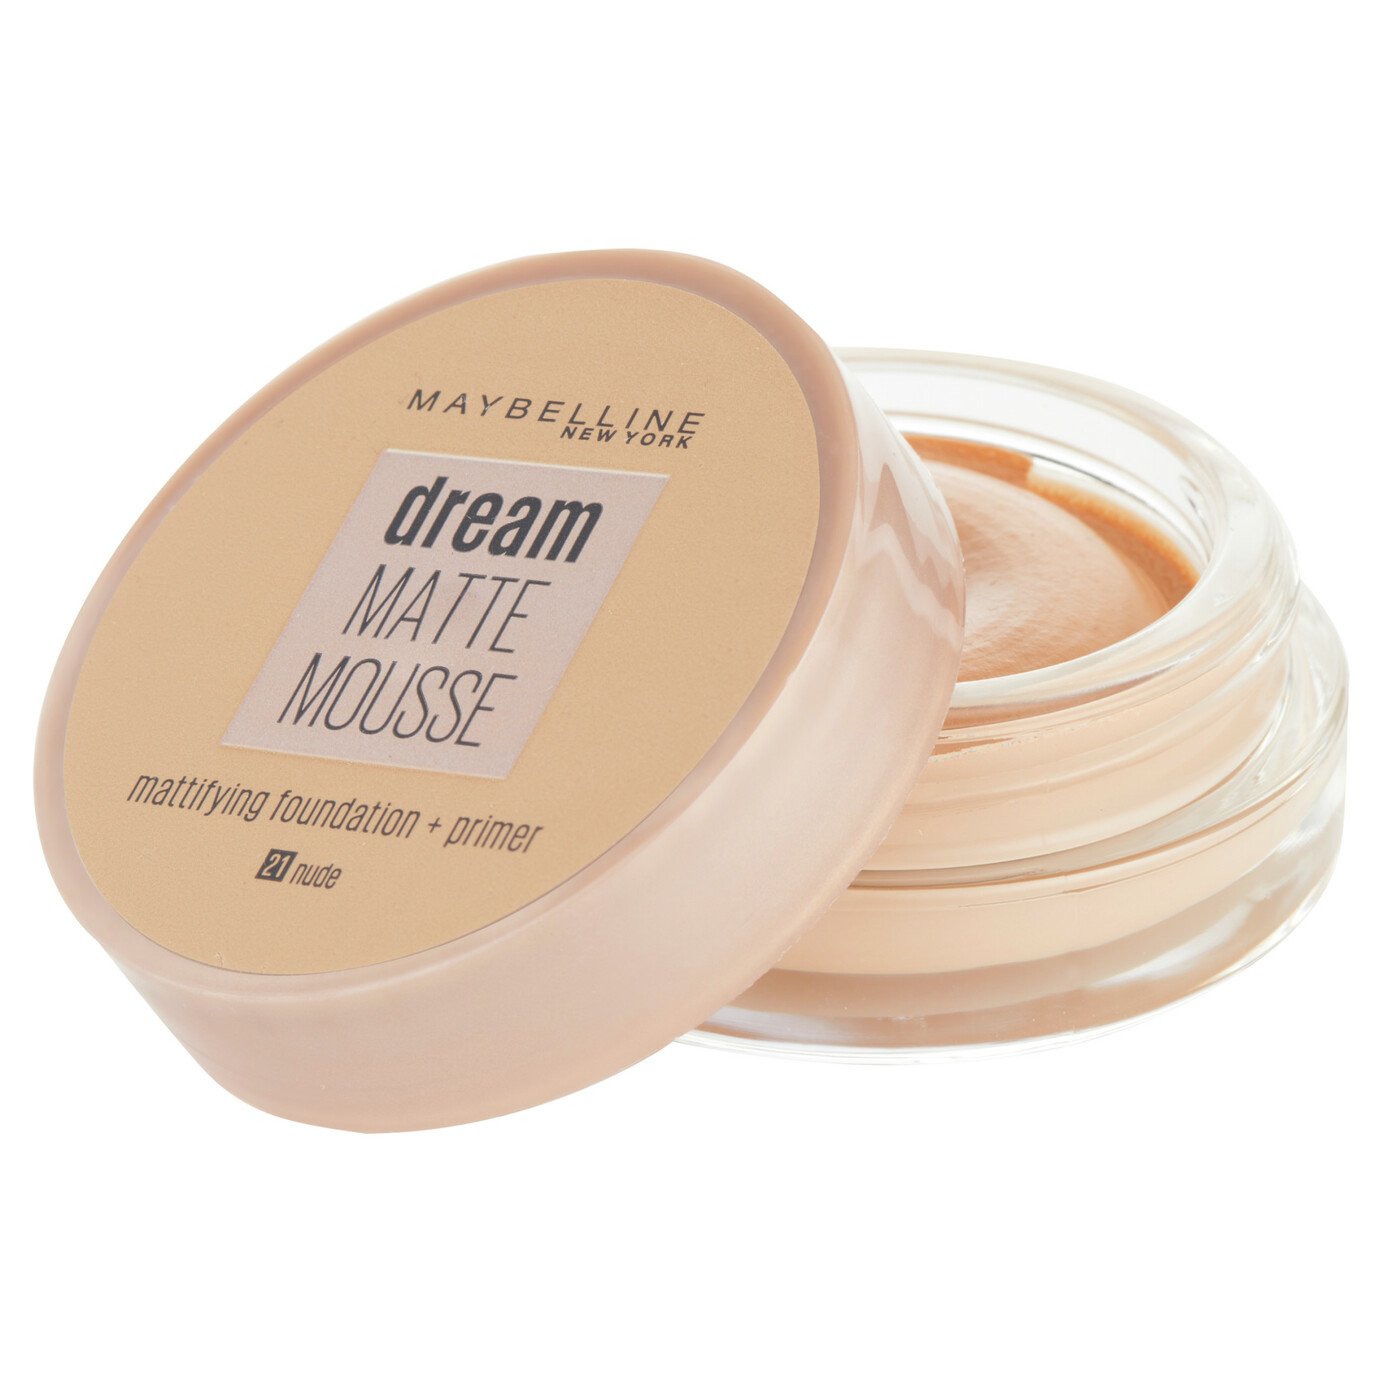 Maybelline Dream Matte Mousse - Nude 21